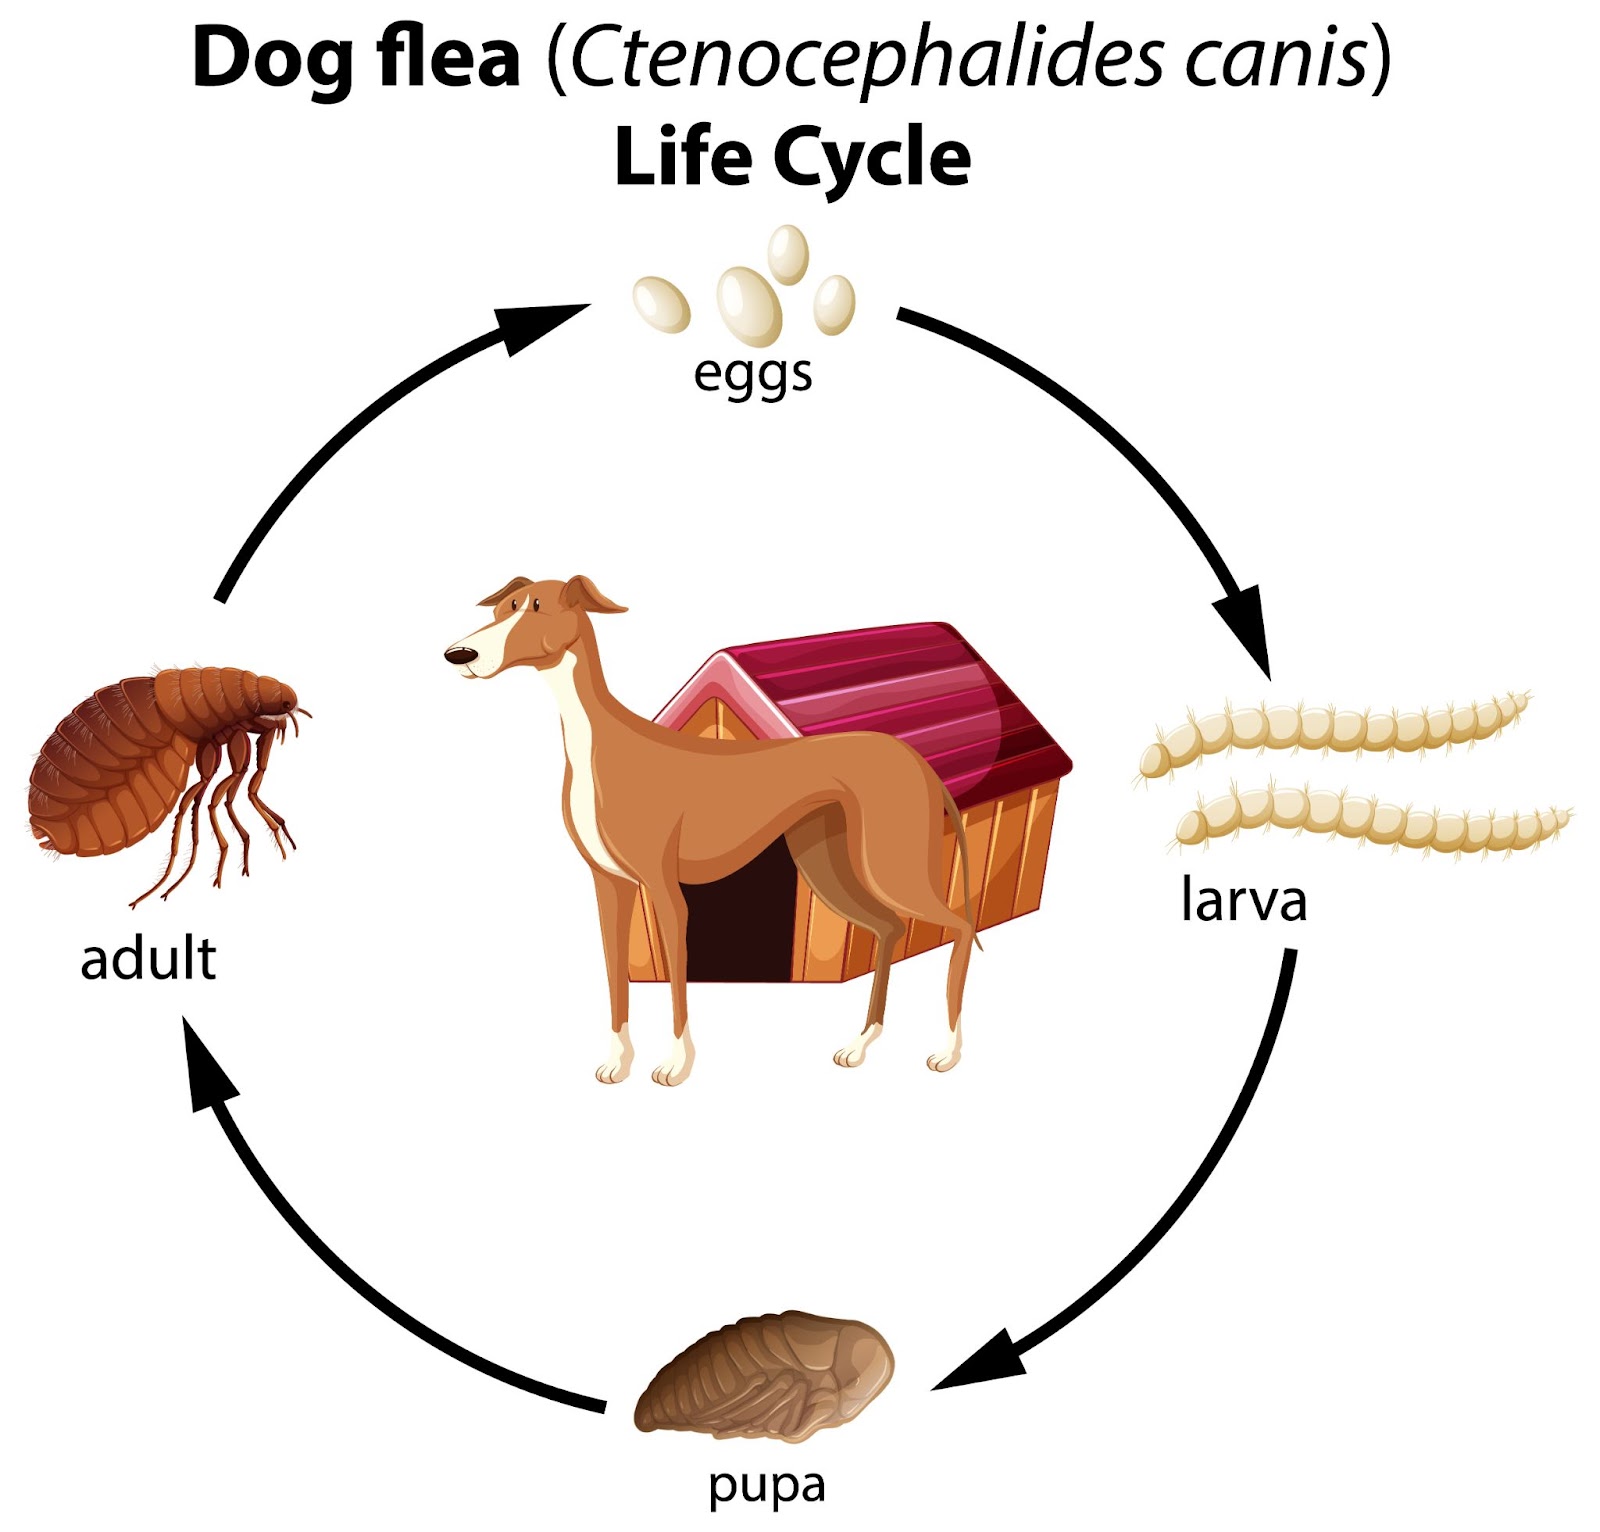 A flea's life cycle from egg to adulthood is 2 to 3 weeks.